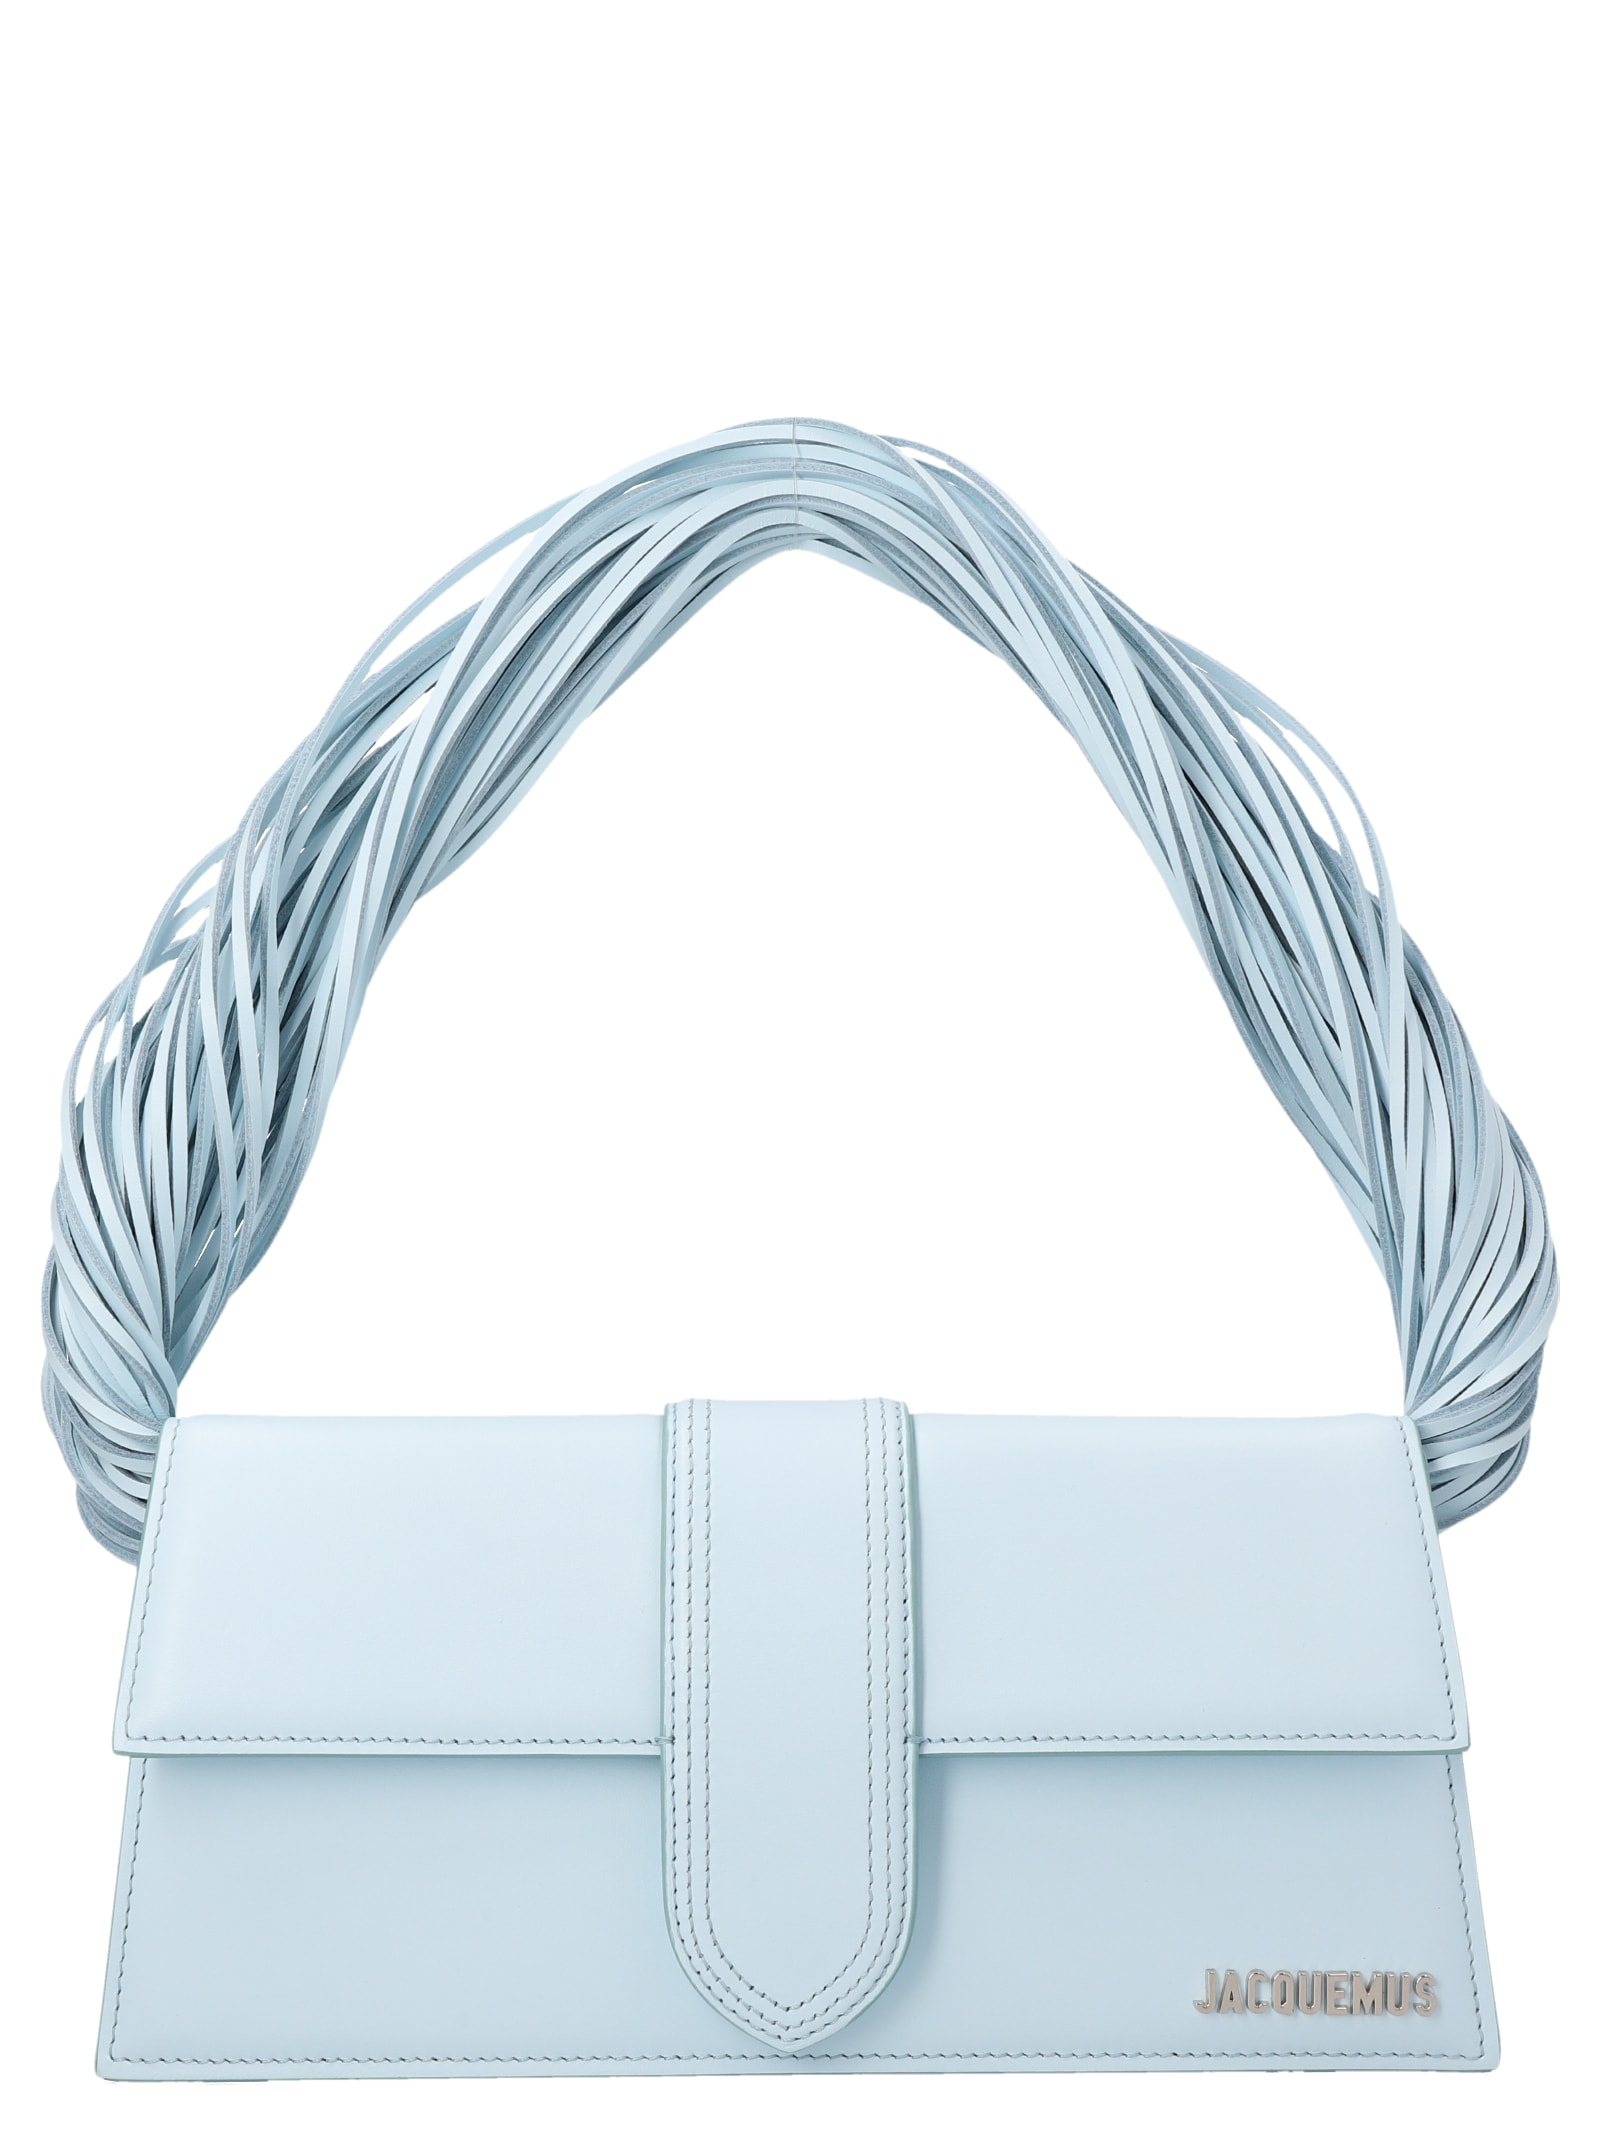 Jacquemus Le Bambino Long Leather Shoulder Bag In Light Blue